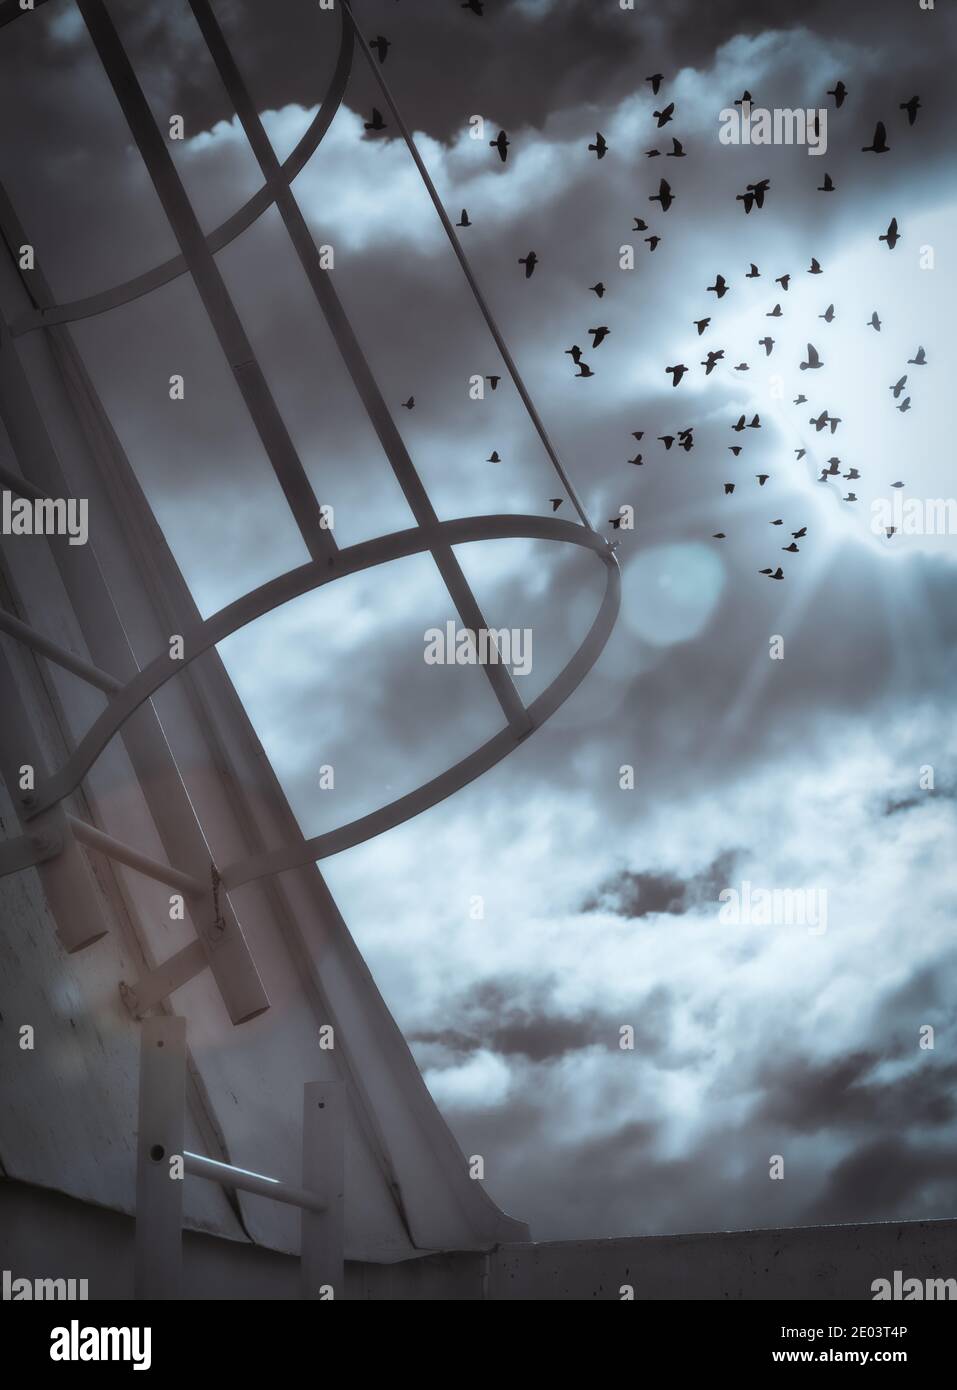 Flock of birds in atmospheric sky with roof ladder in foreground. Concept of escape, freedom, intrigue and mystery Stock Photo